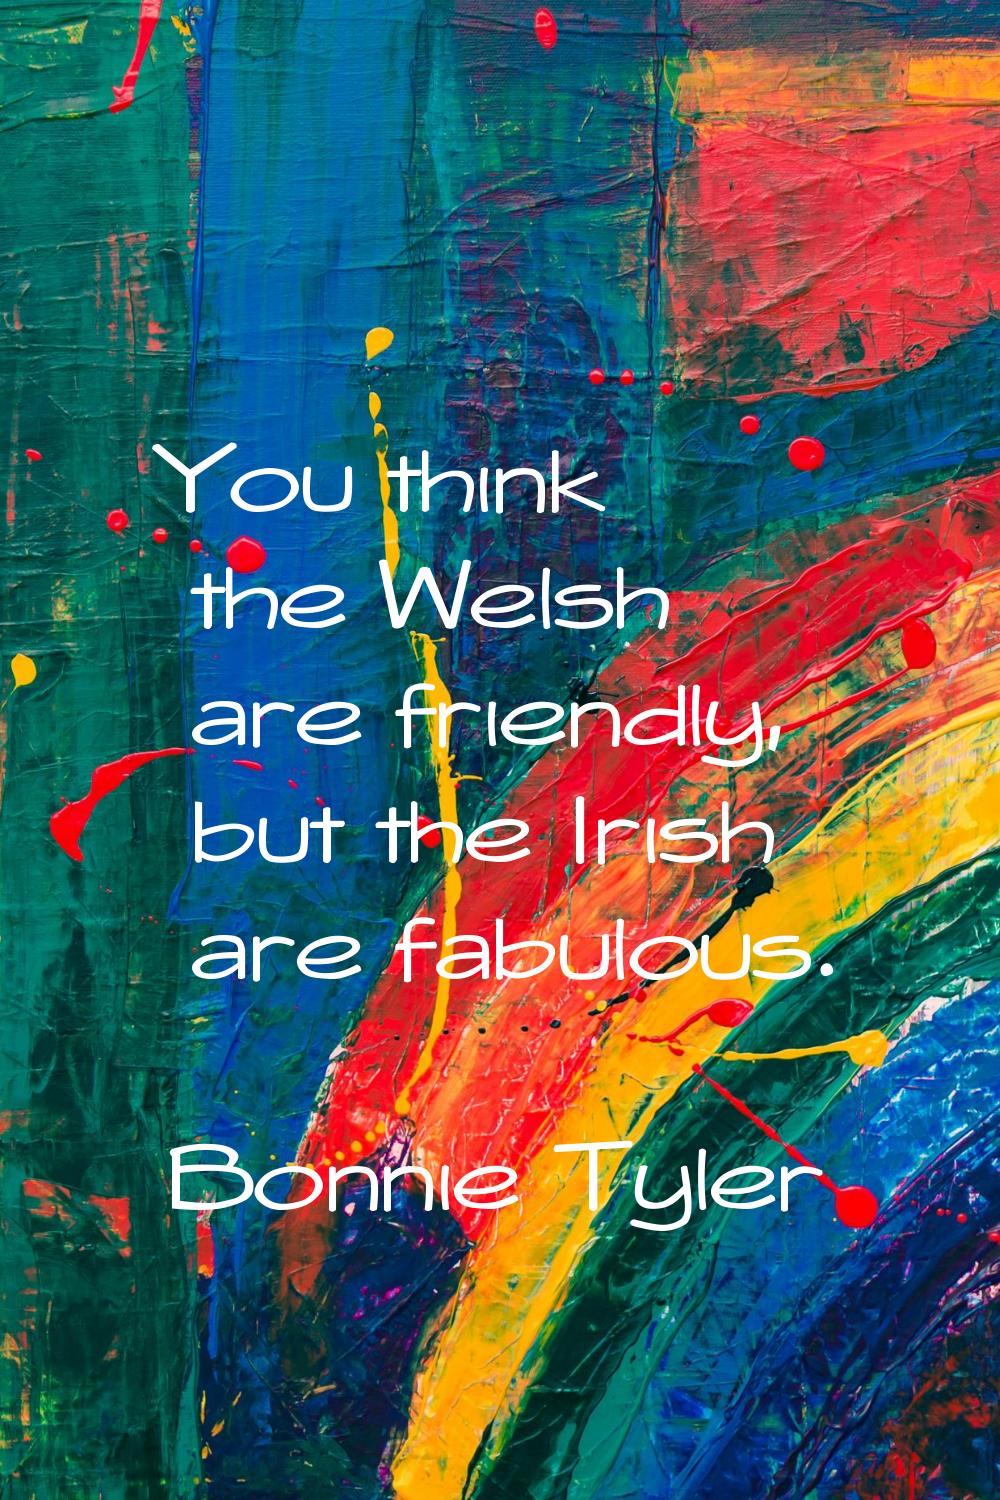 You think the Welsh are friendly, but the Irish are fabulous.